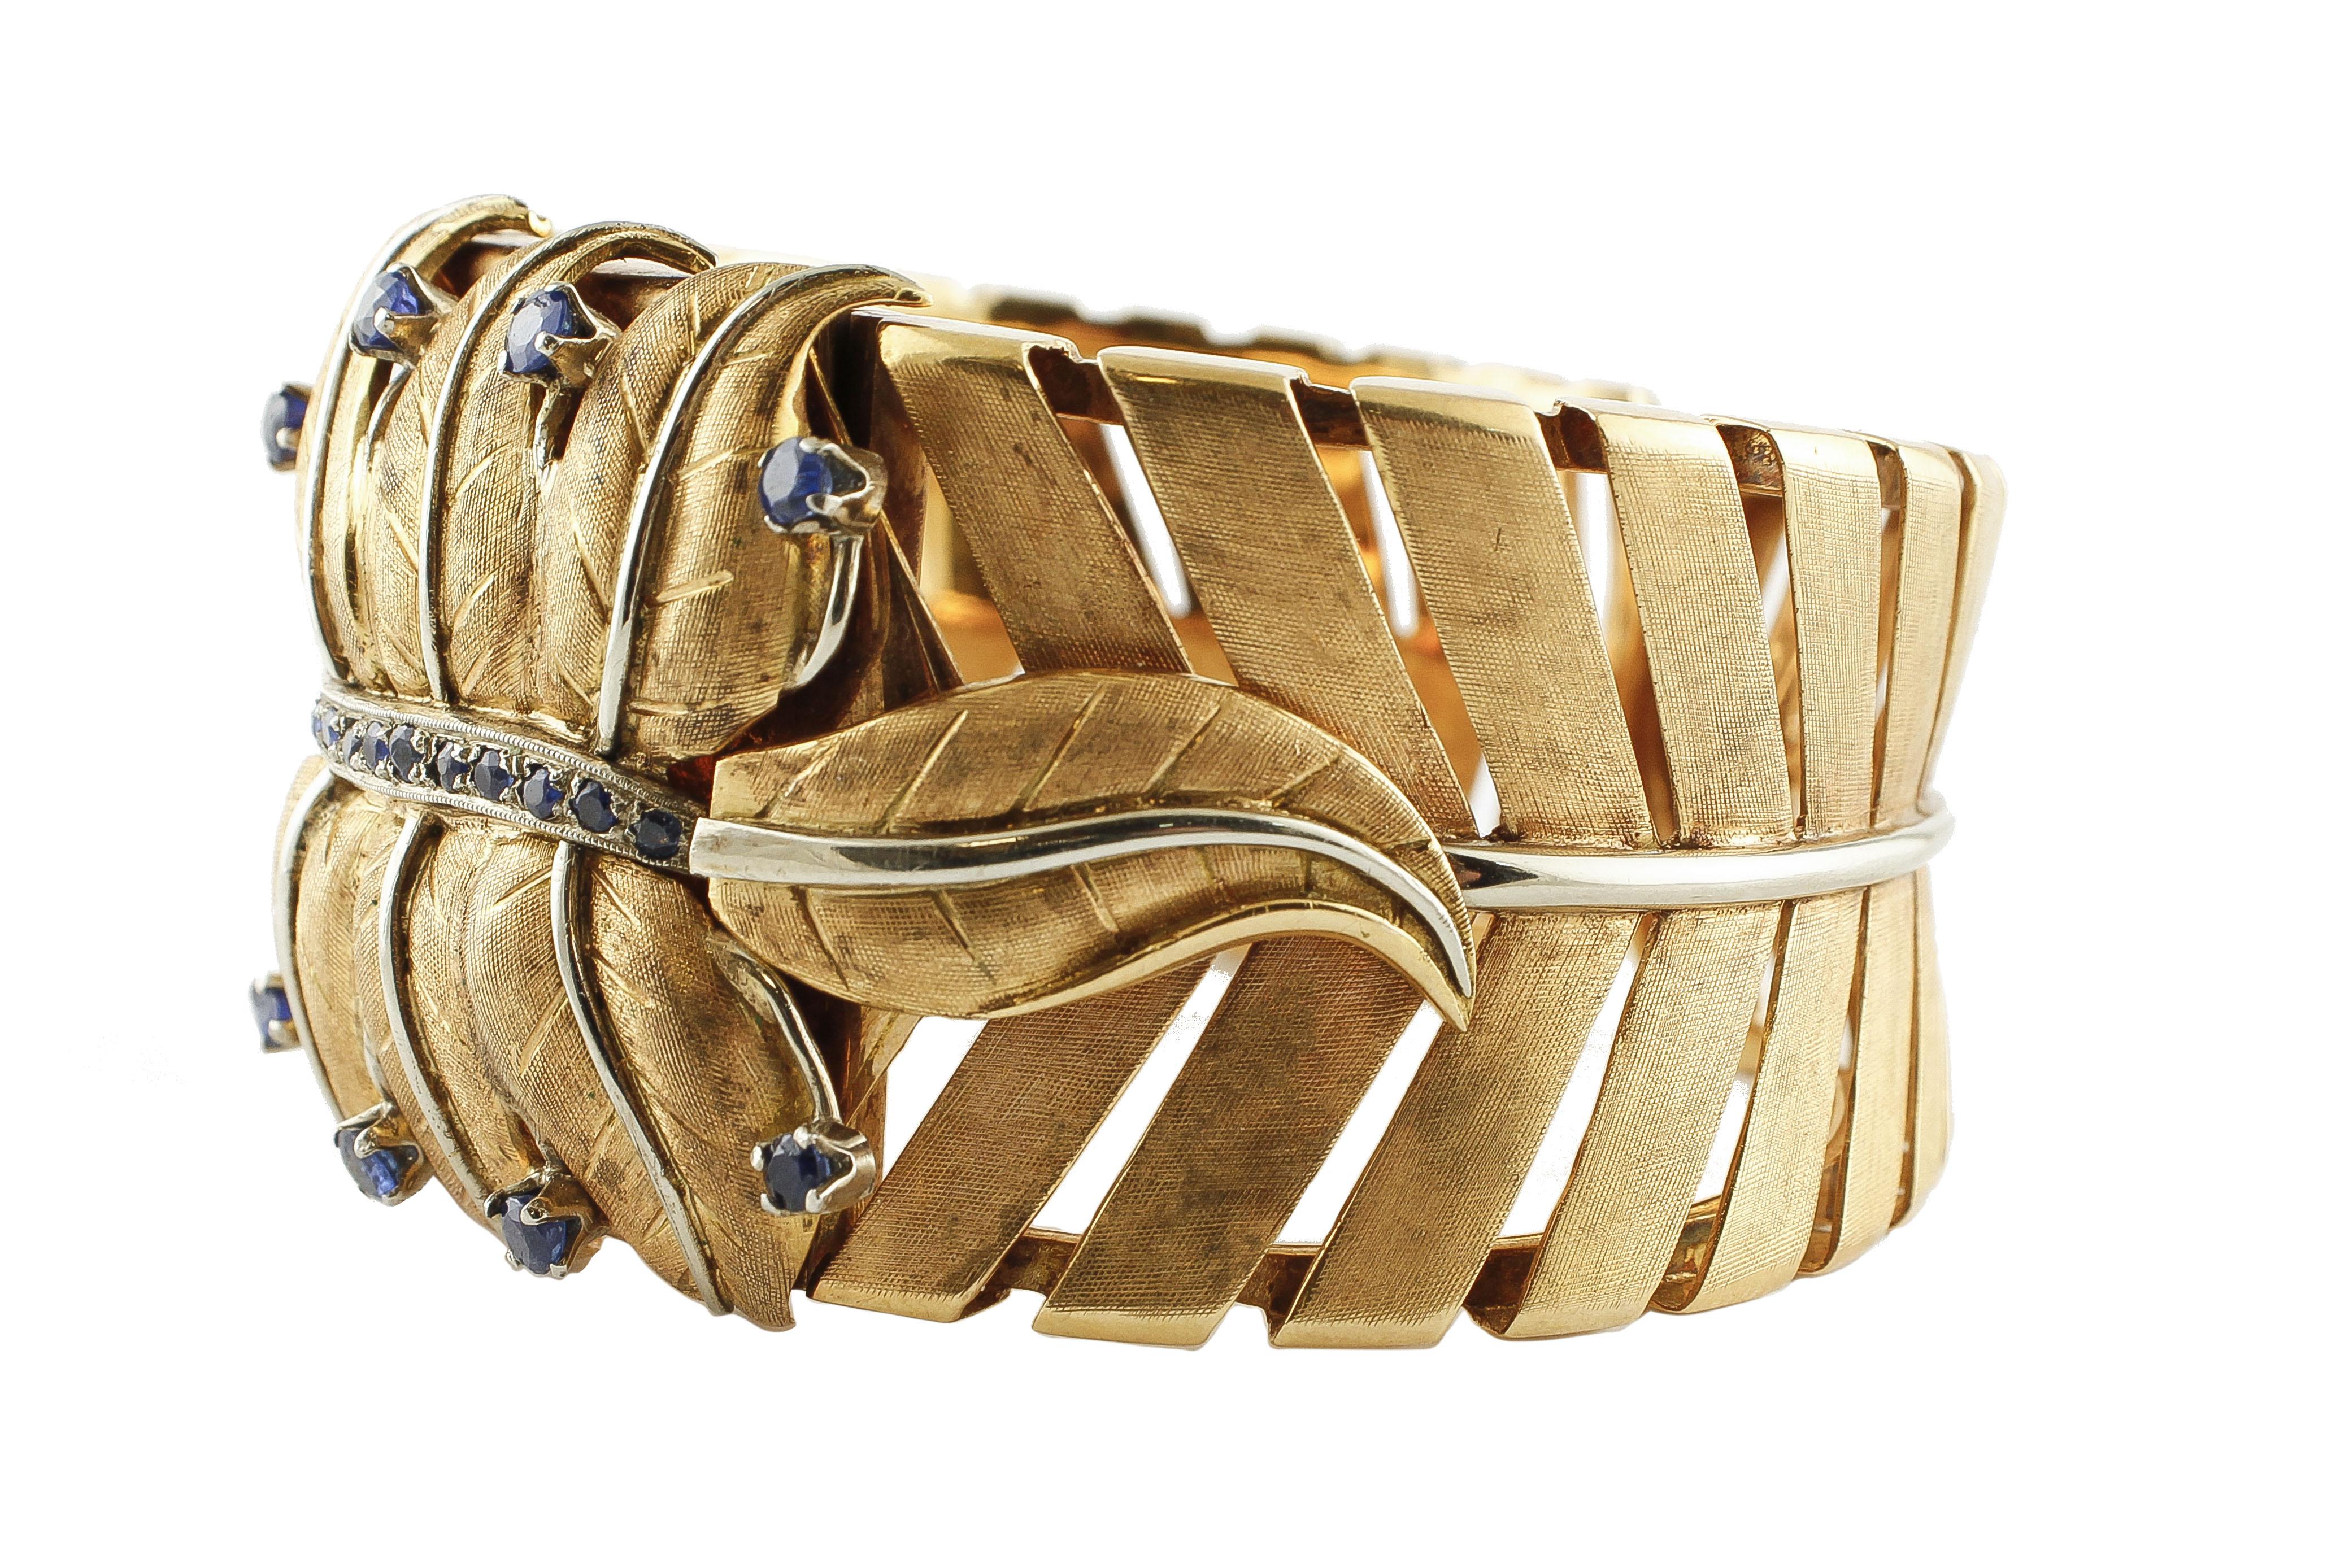 Astonishing retro cuff bracelet in 18k rose gold and white gold structure. The bracelet is designed with leaves motif with a central leaves theme studded with beautiful blue sapphires. 
This fantastic bracelet is totally handmade by Italian master